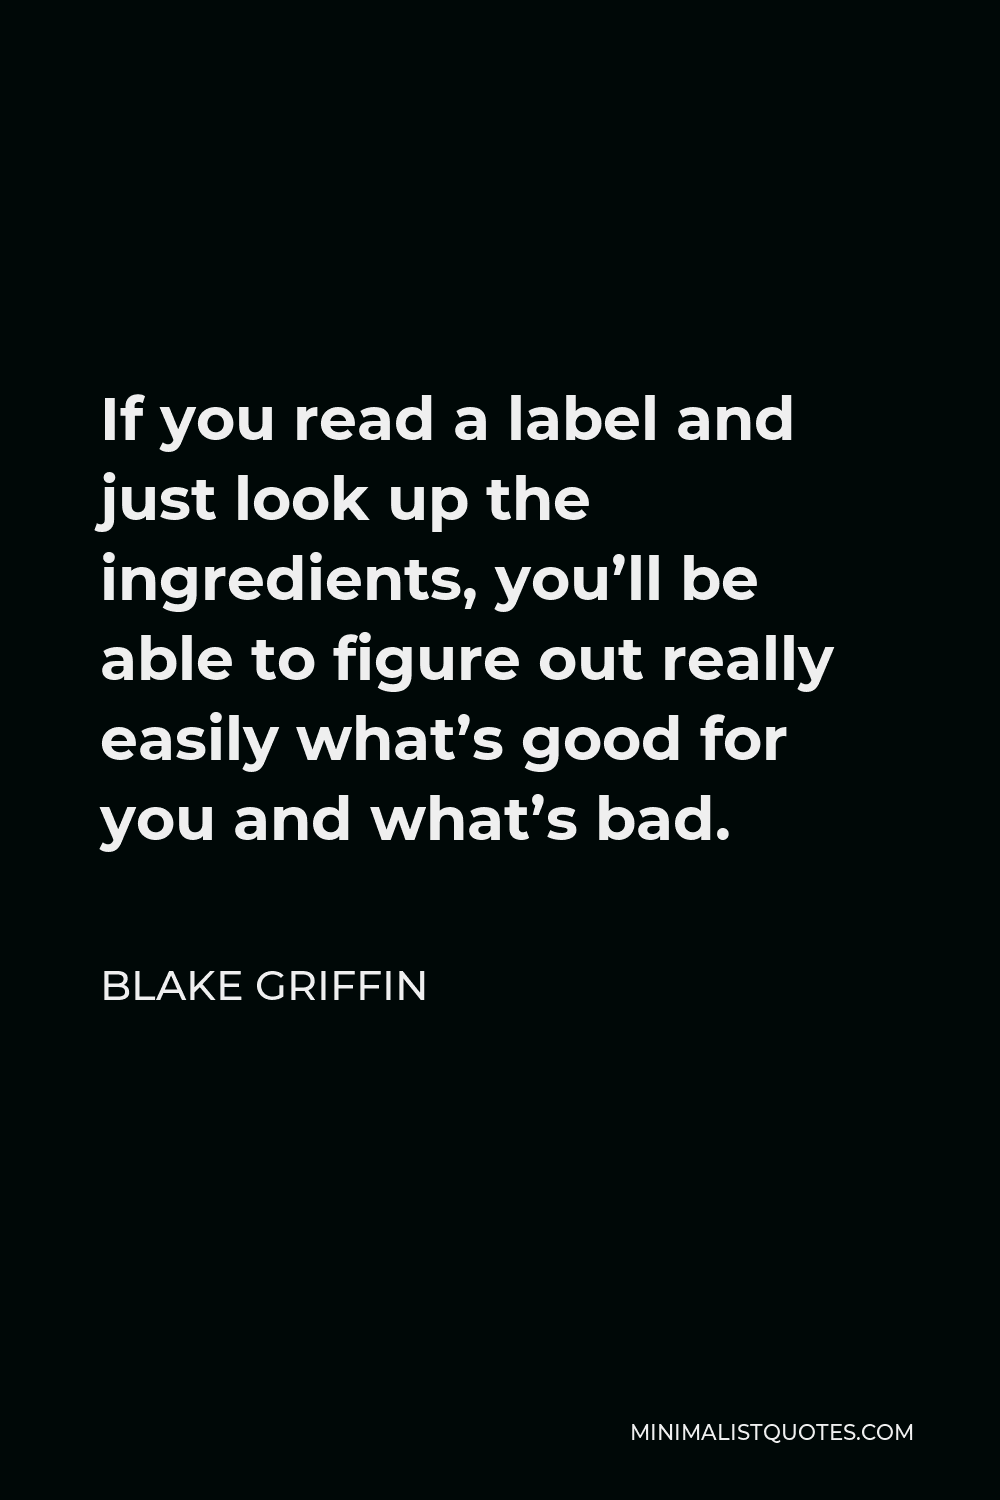 Blake Griffin Quote - If you read a label and just look up the ingredients, you’ll be able to figure out really easily what’s good for you and what’s bad.